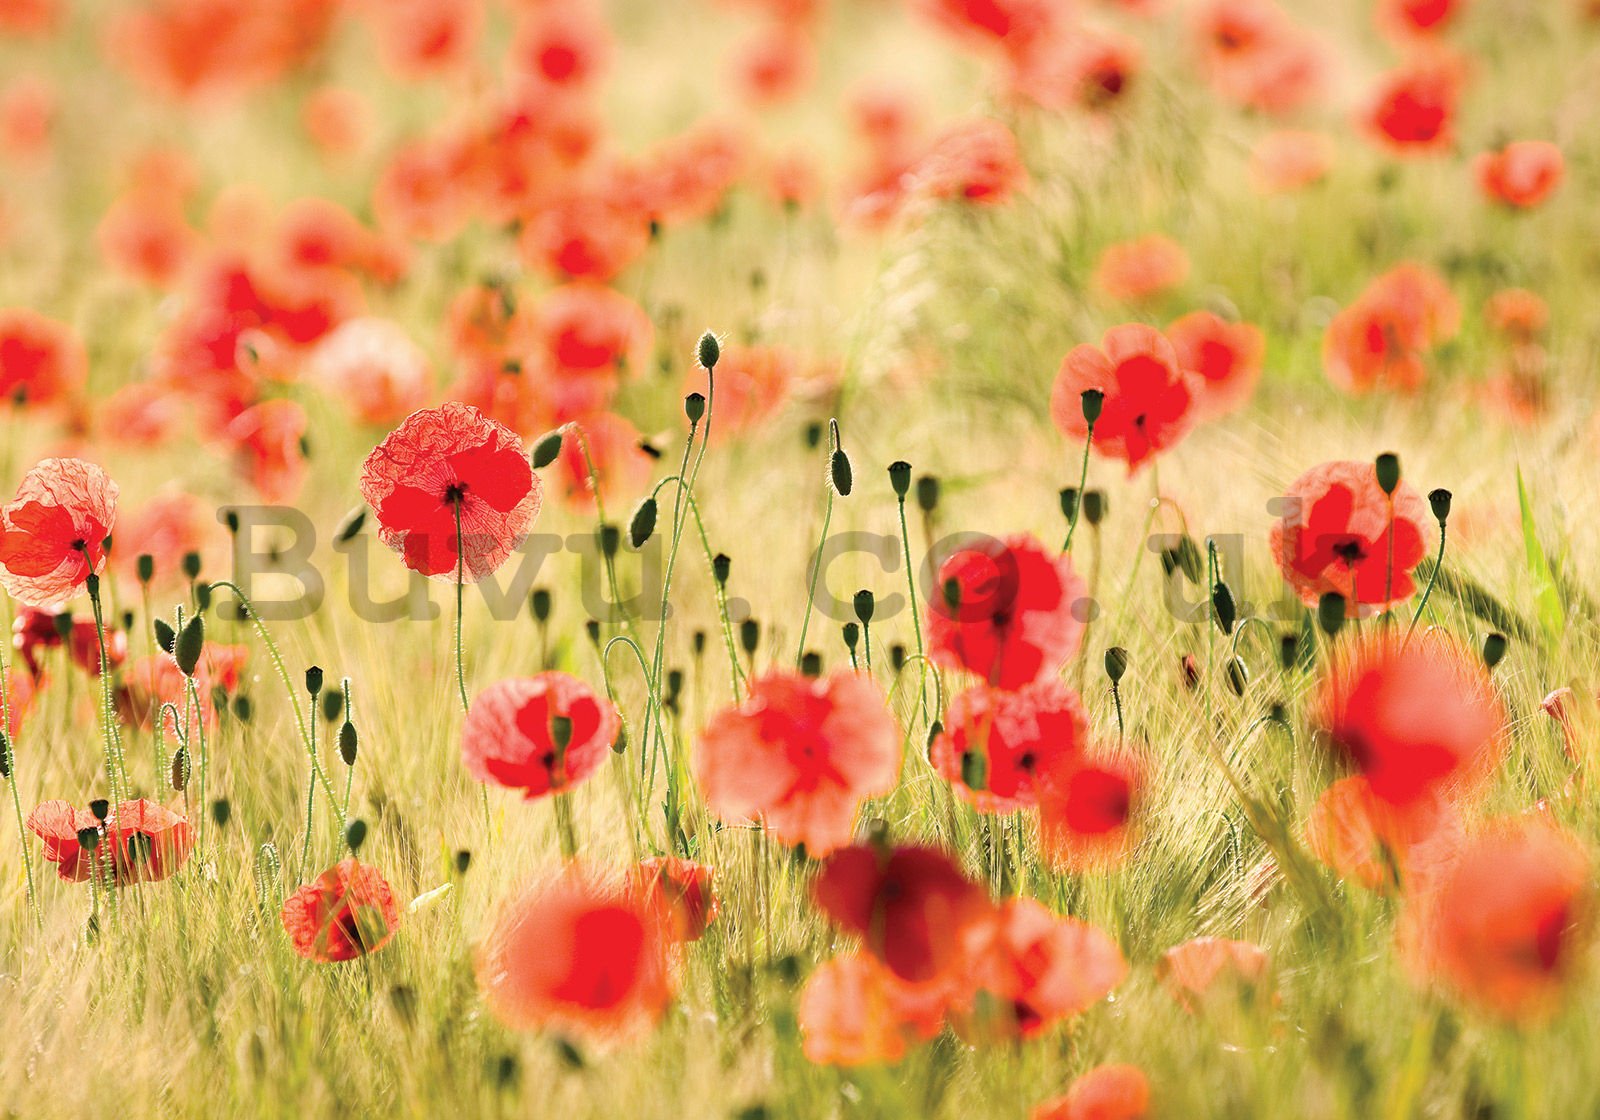 Wall mural vlies: Meadow with poppies - 200x140 cm